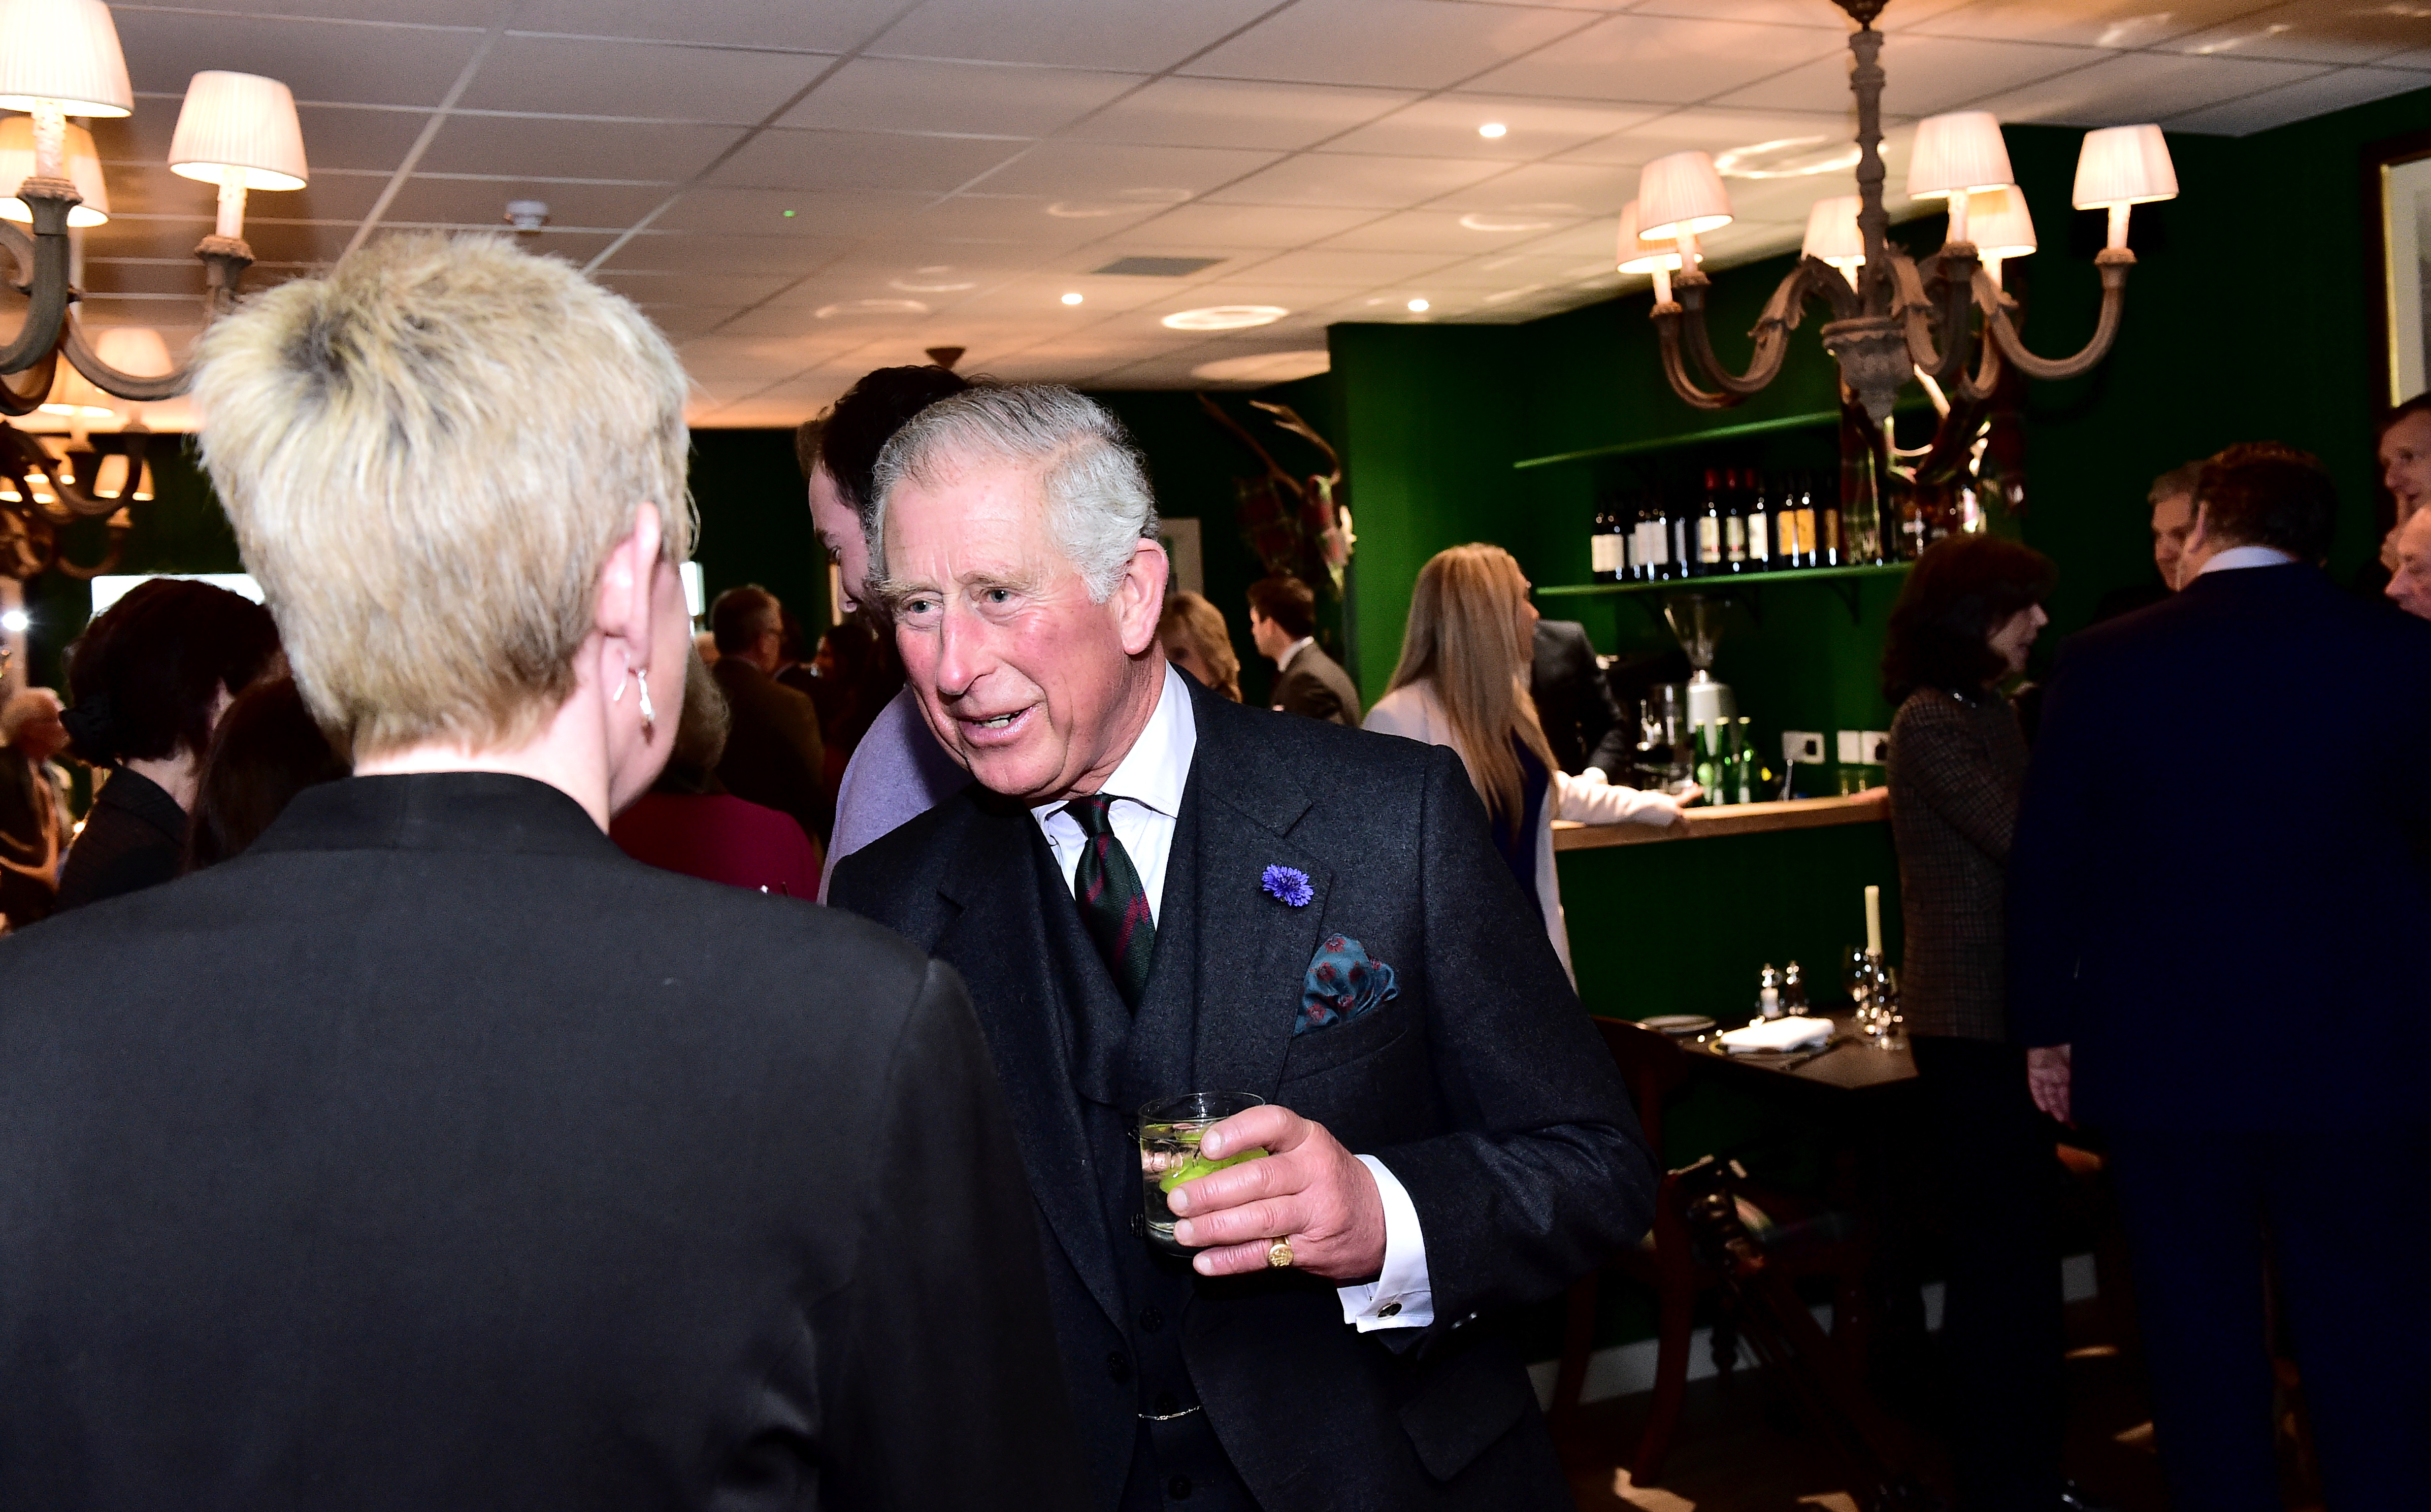 The Duke of Rothesay, Prince Charles, visited the new Rothesay Restaurant and Highgrove shop in Ballater in 2016.